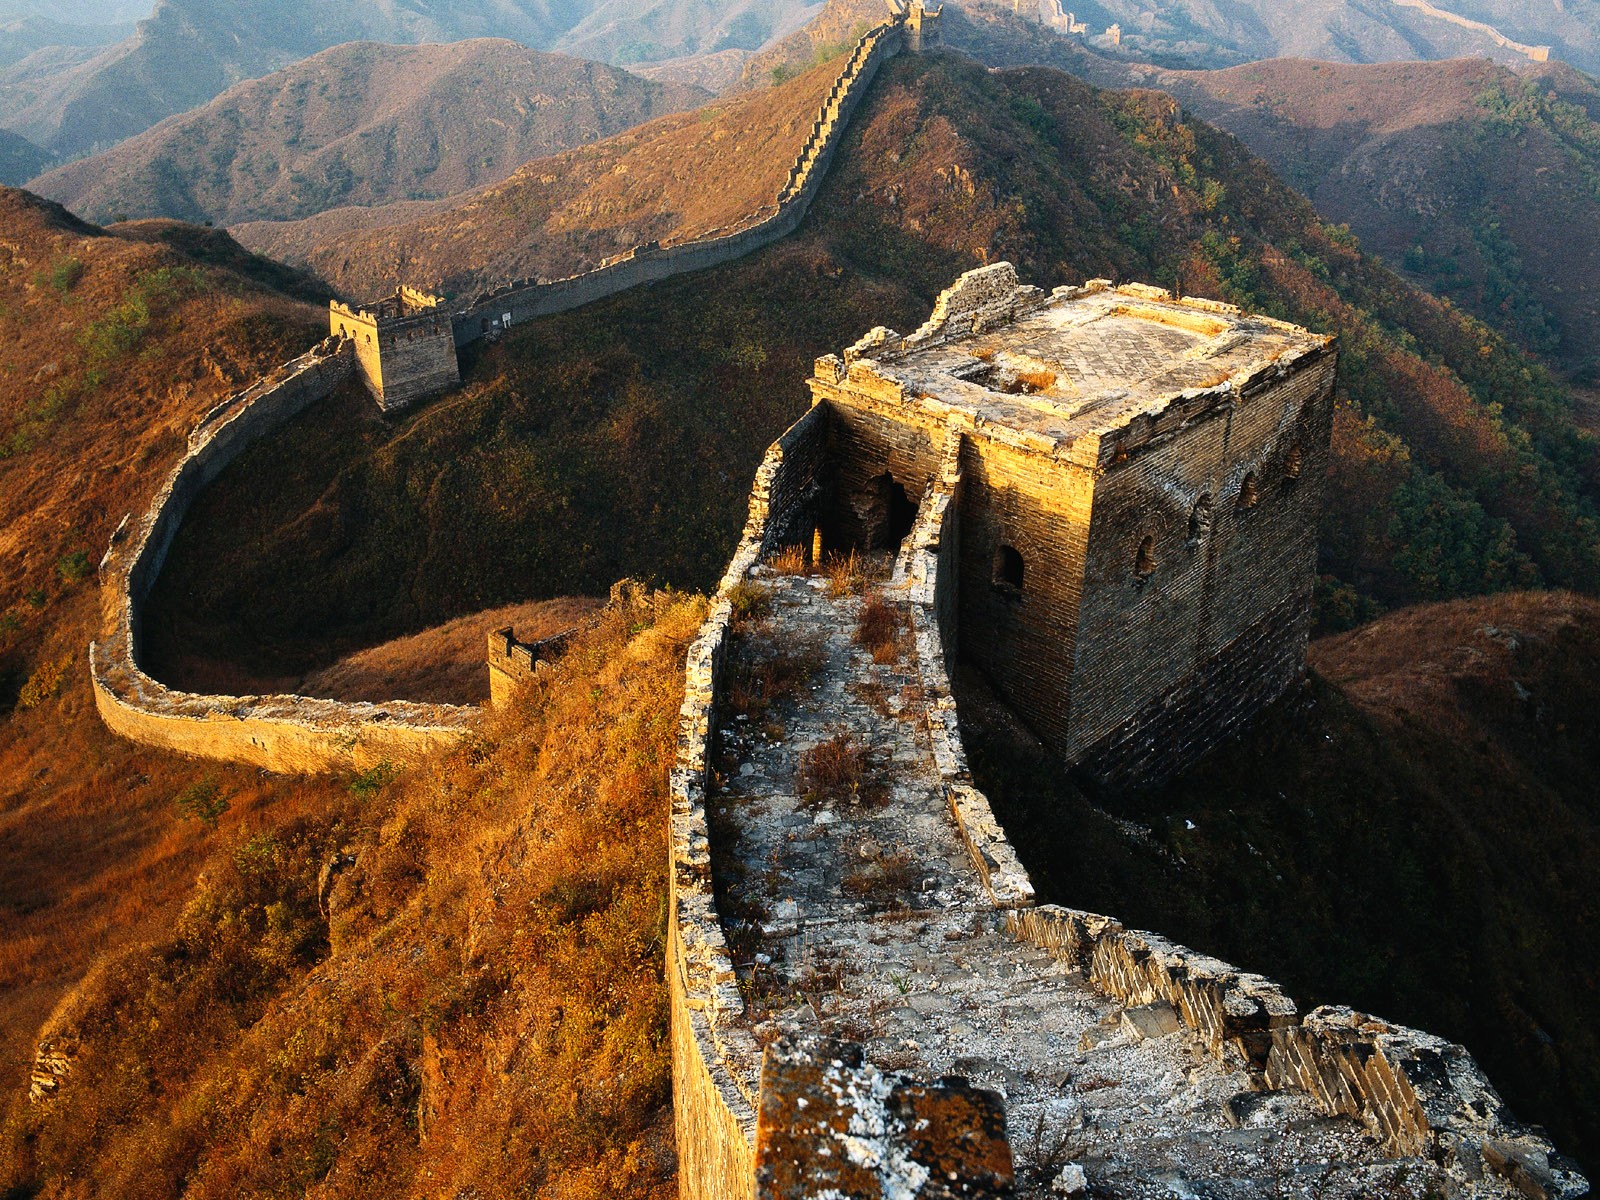 General 1600x1200 Great Wall of China China mountains landscape fort stone wall abandoned ruins Asia World Heritage Site landmark